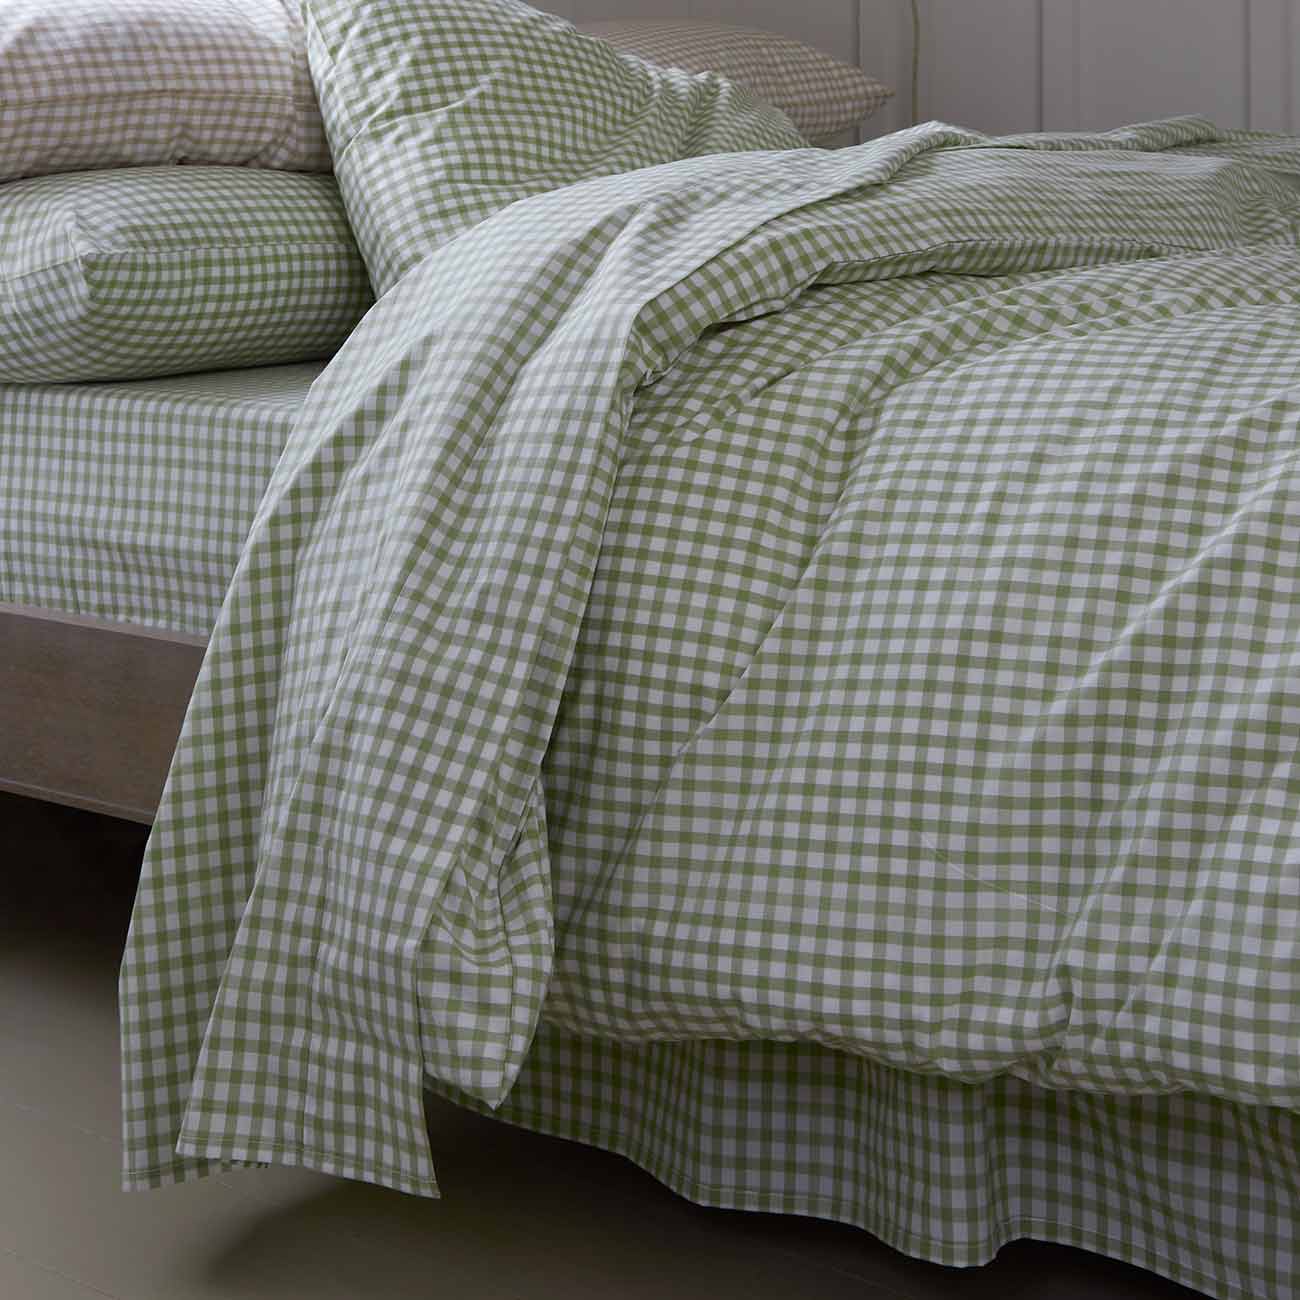 Pear and Cafe Au Lait Small Gingham Cotton Bedding